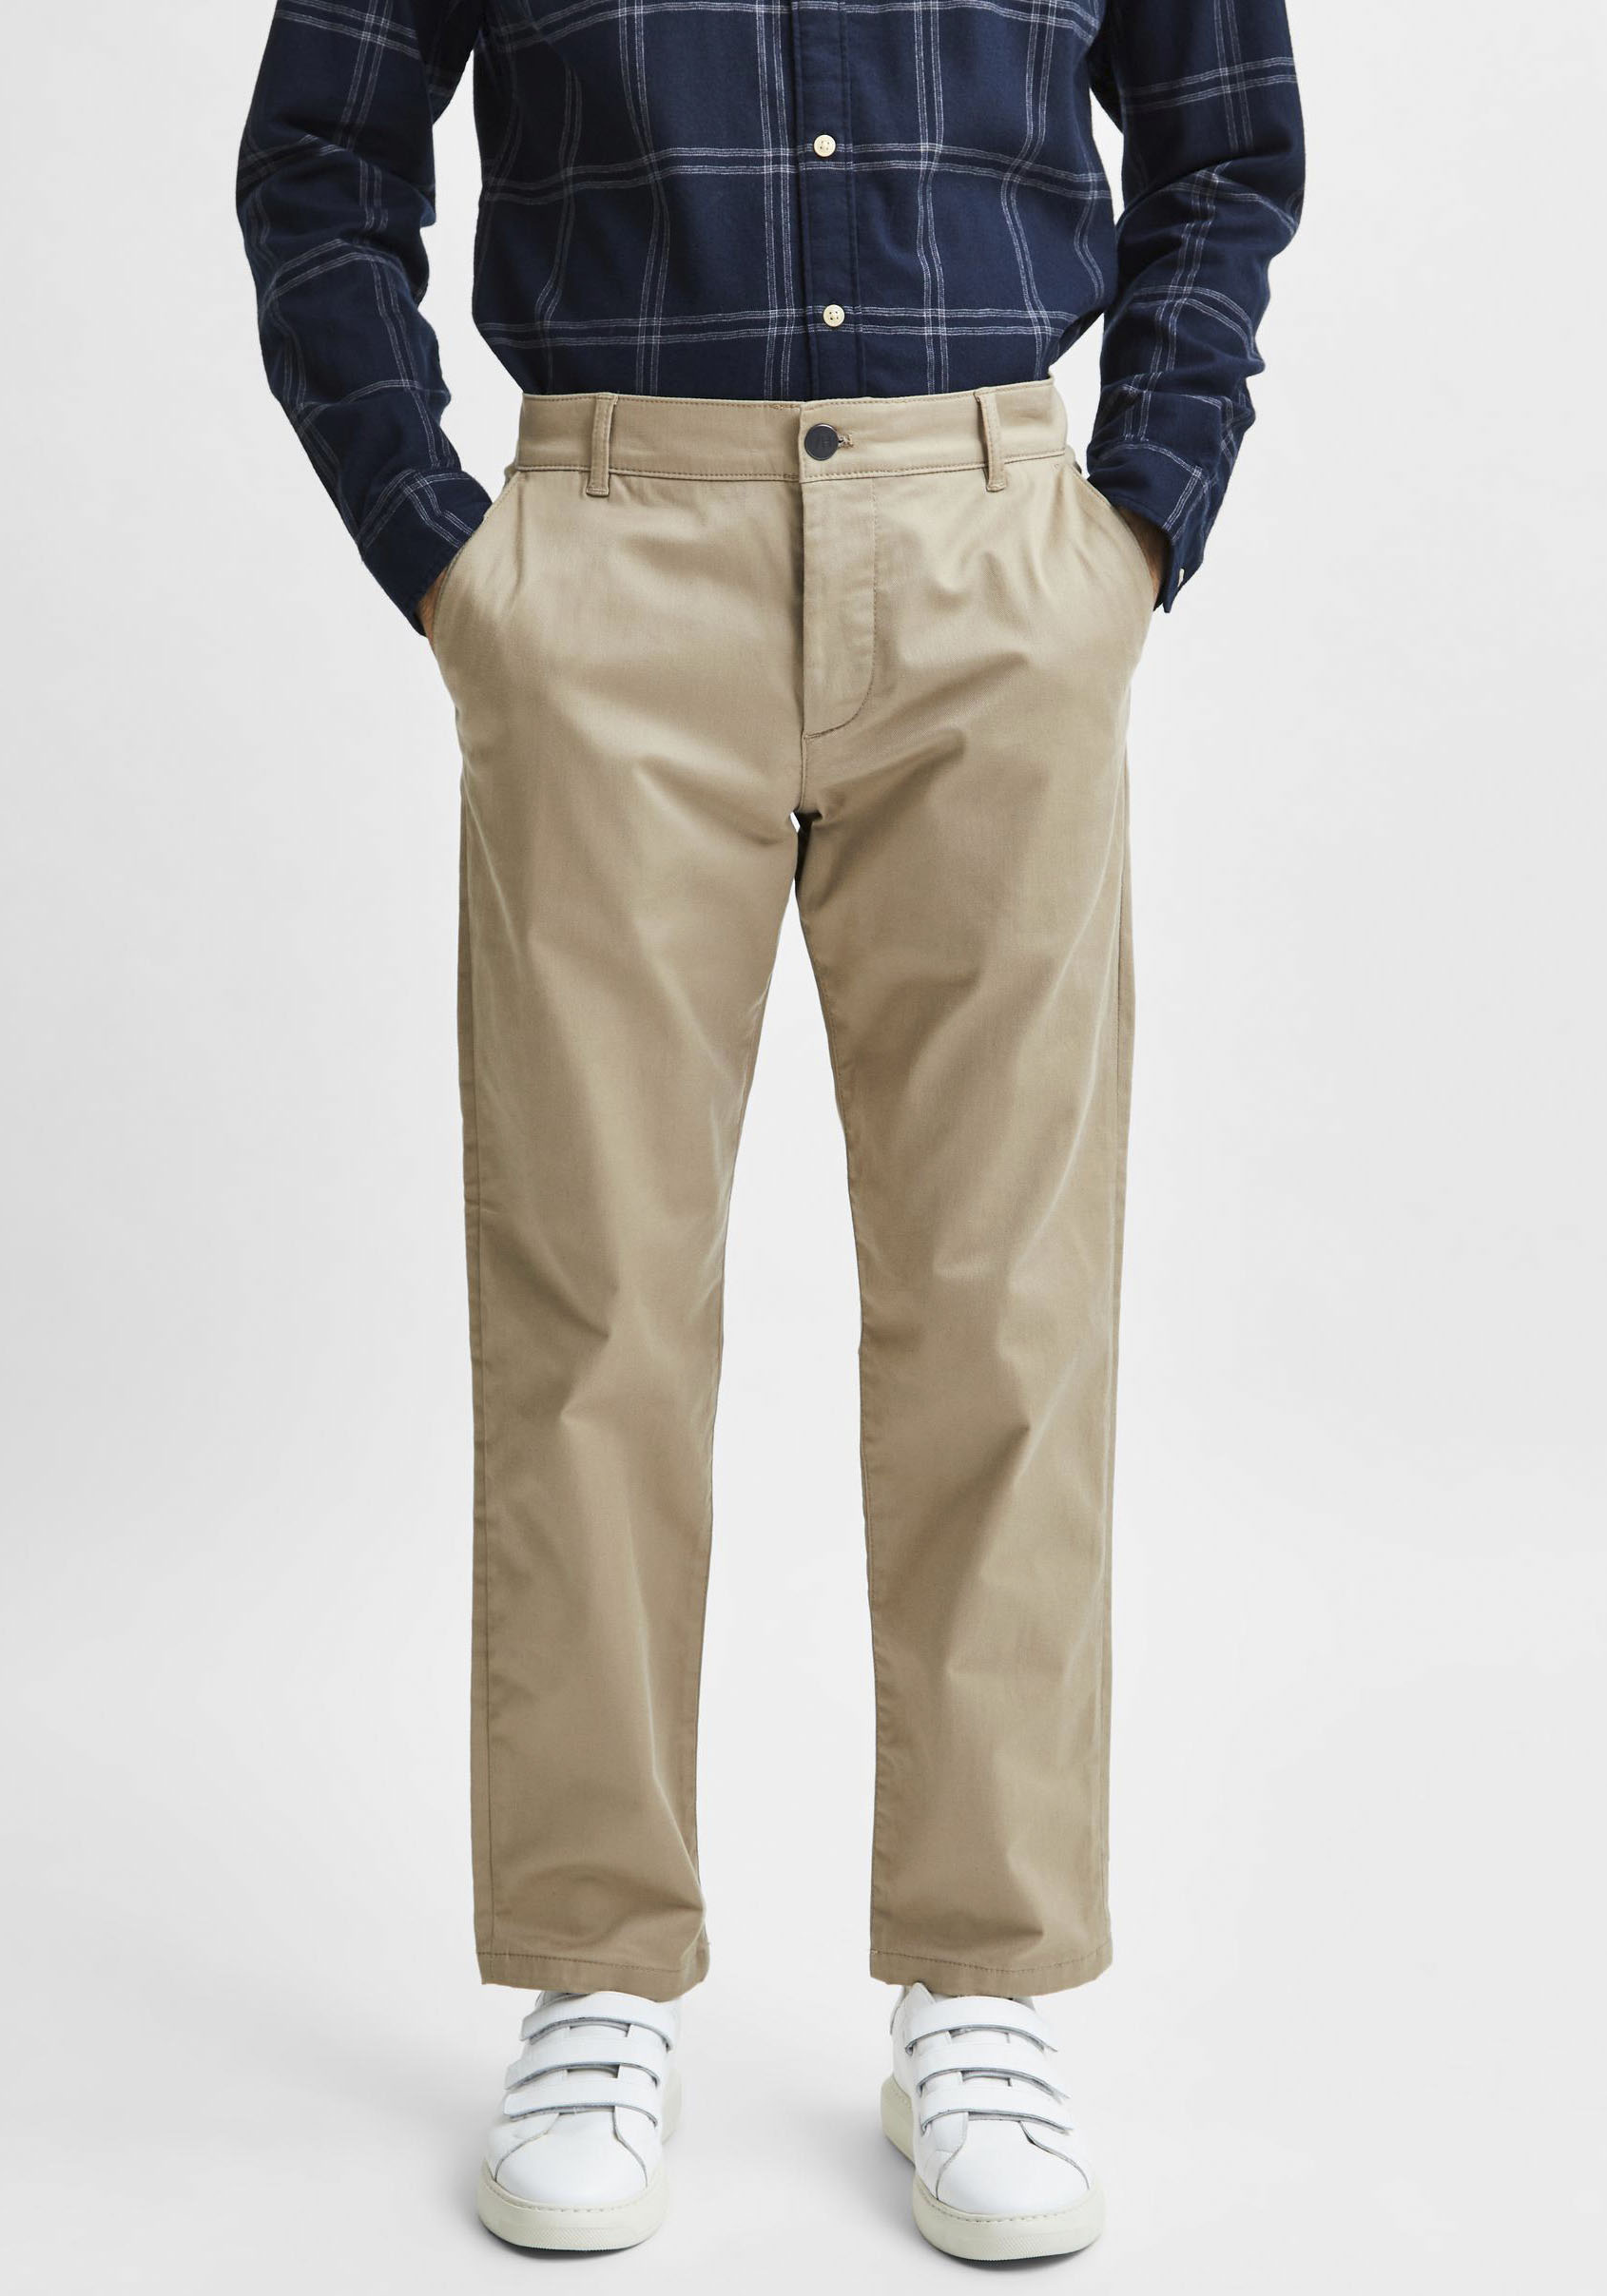 SELECTED HOMME Chinohose »SE Chino« von Selected Homme